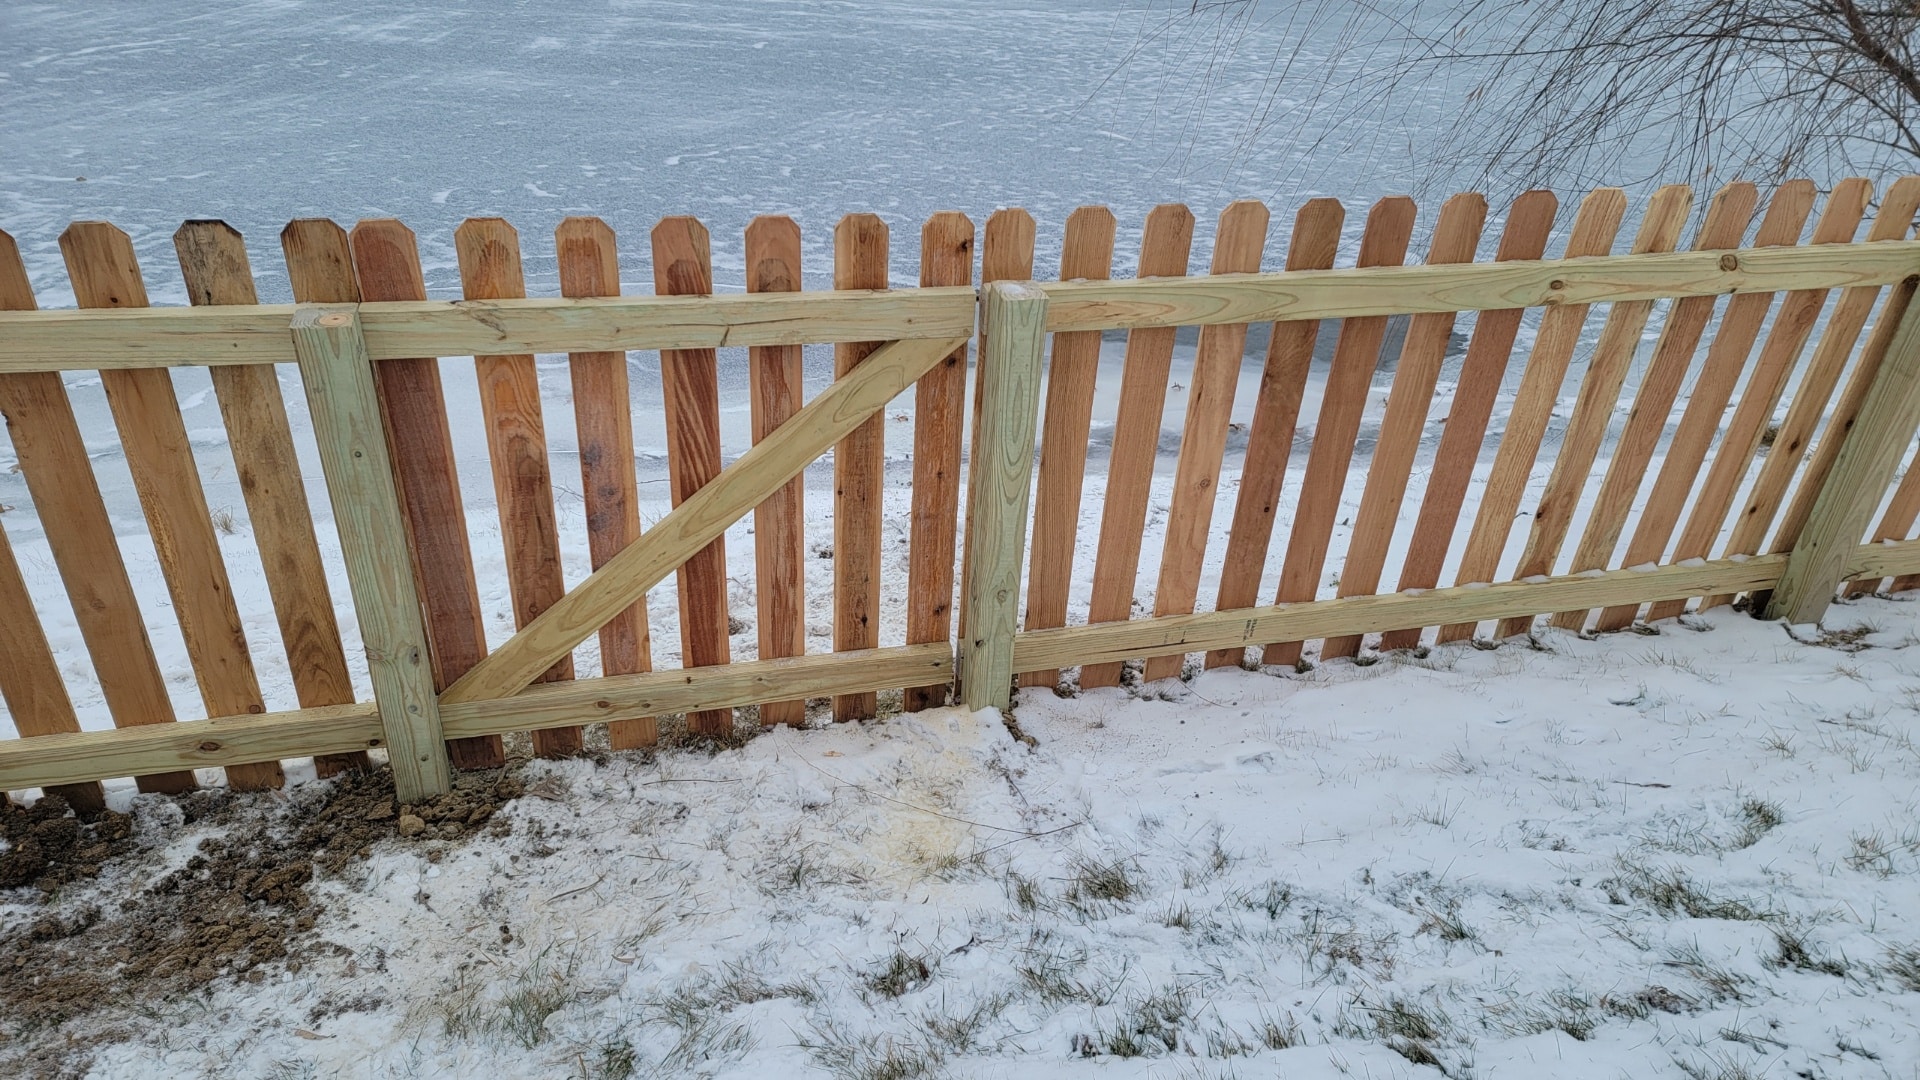 contractor for wooden gate fencing installation services in Indianapolis